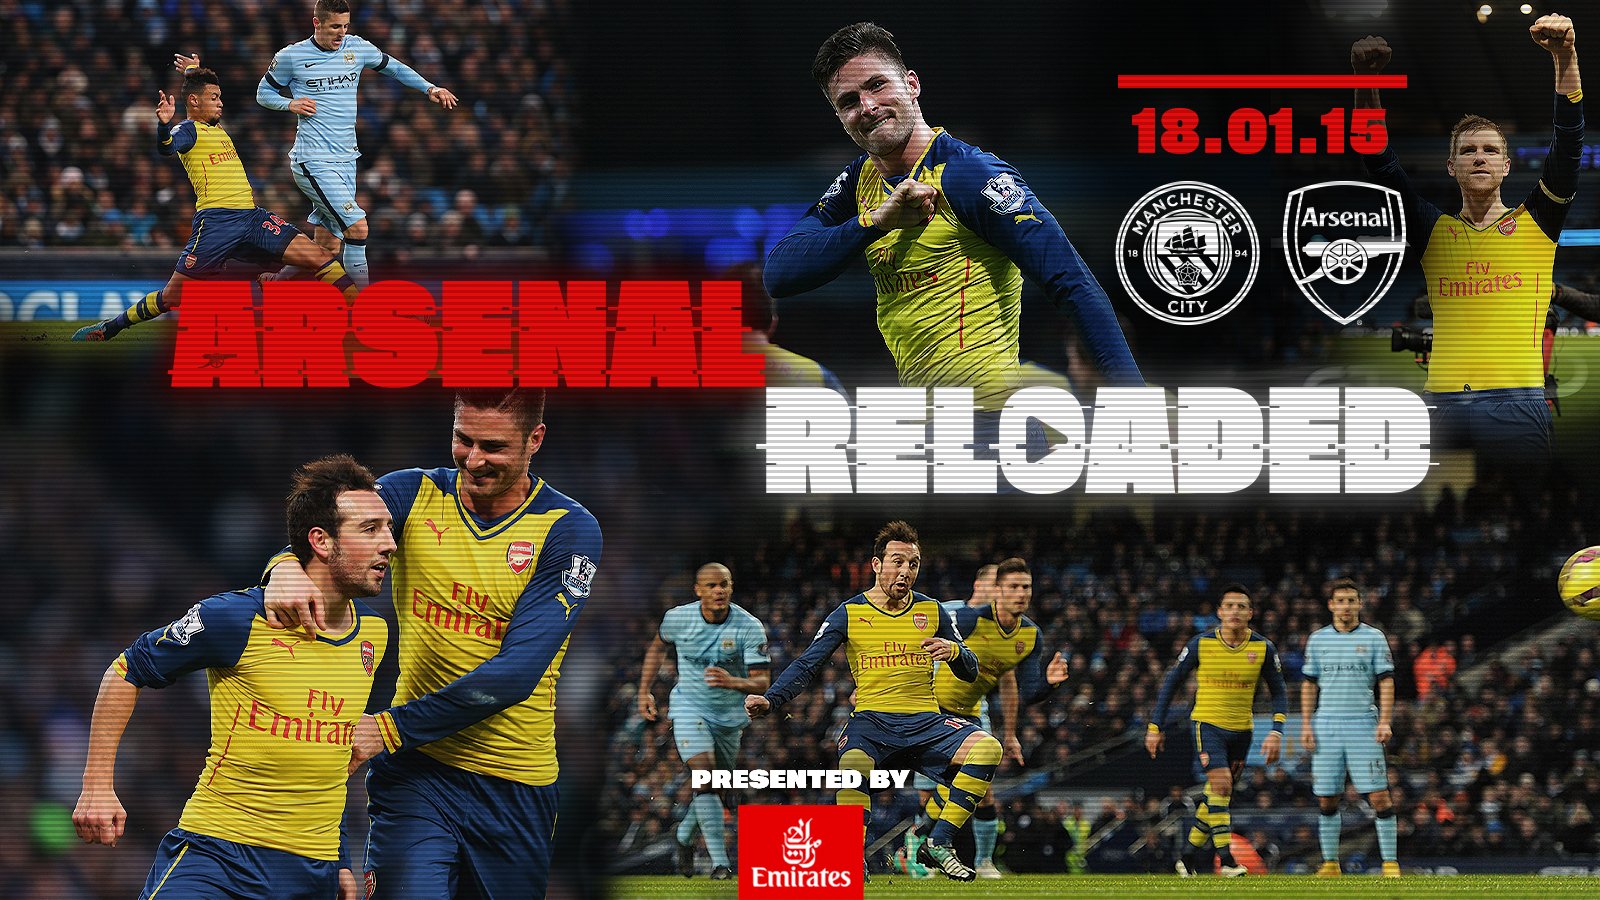 Get involved in the next Arsenal Reloaded! | Video | News | Arsenal.com